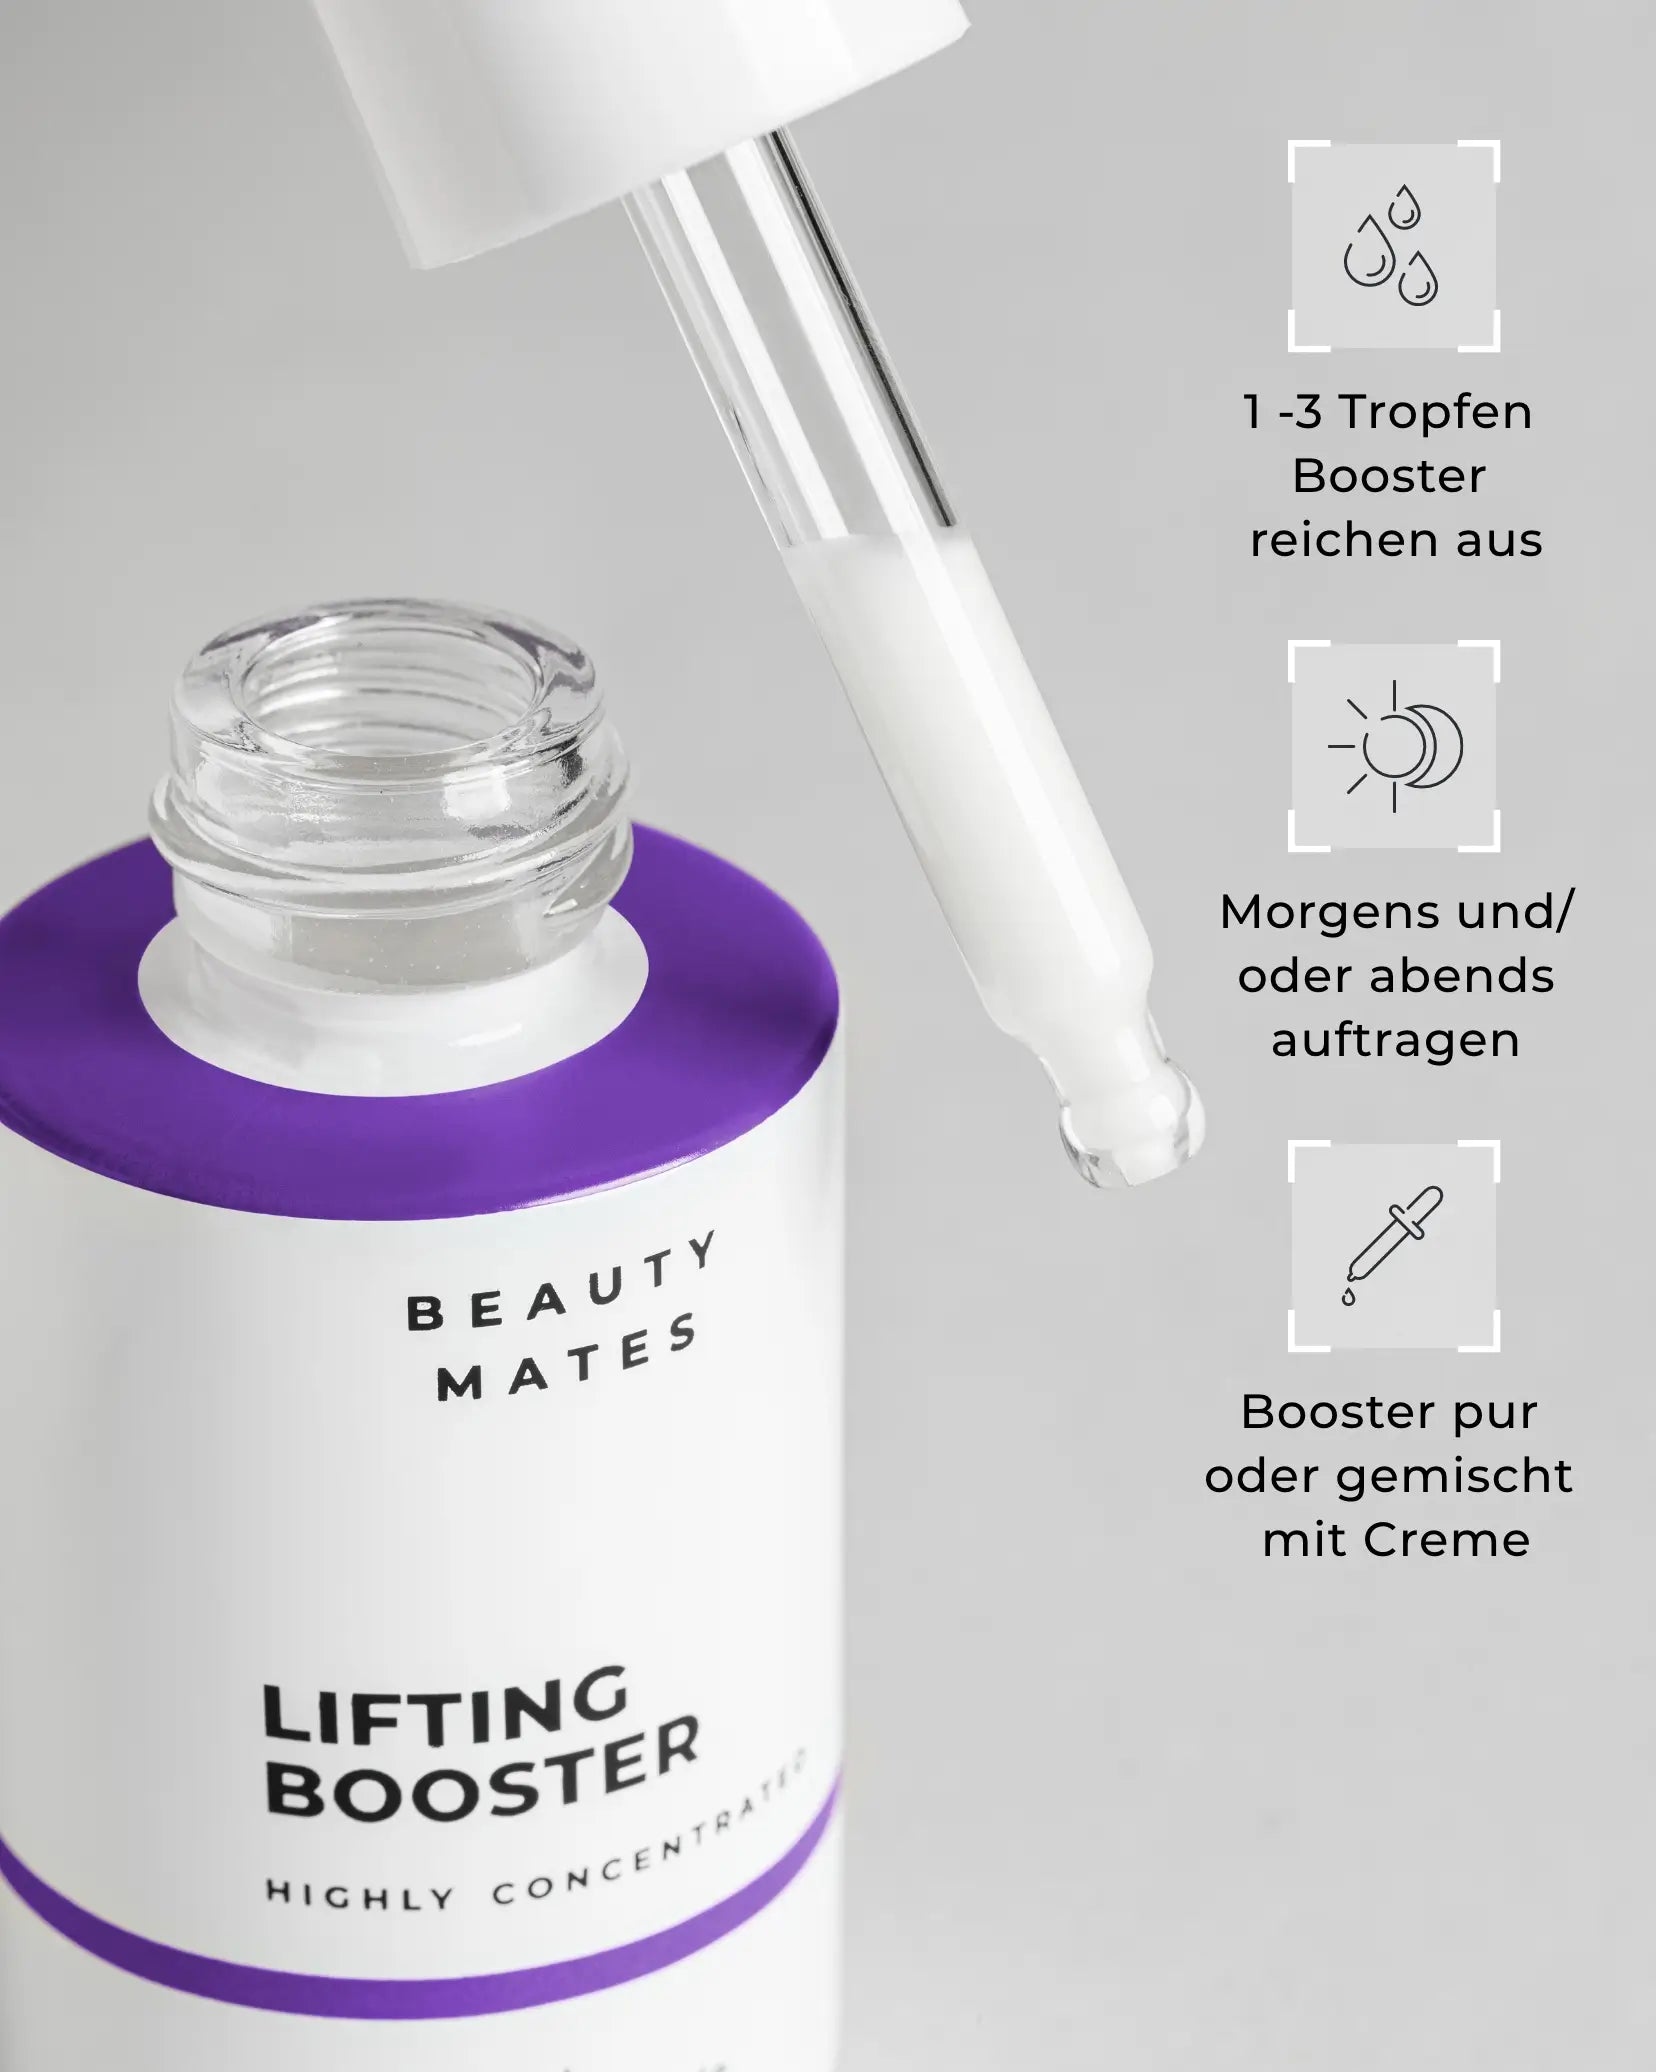 Beauty Mates Lifting Booster - Anwendung des Serums mit Pipette